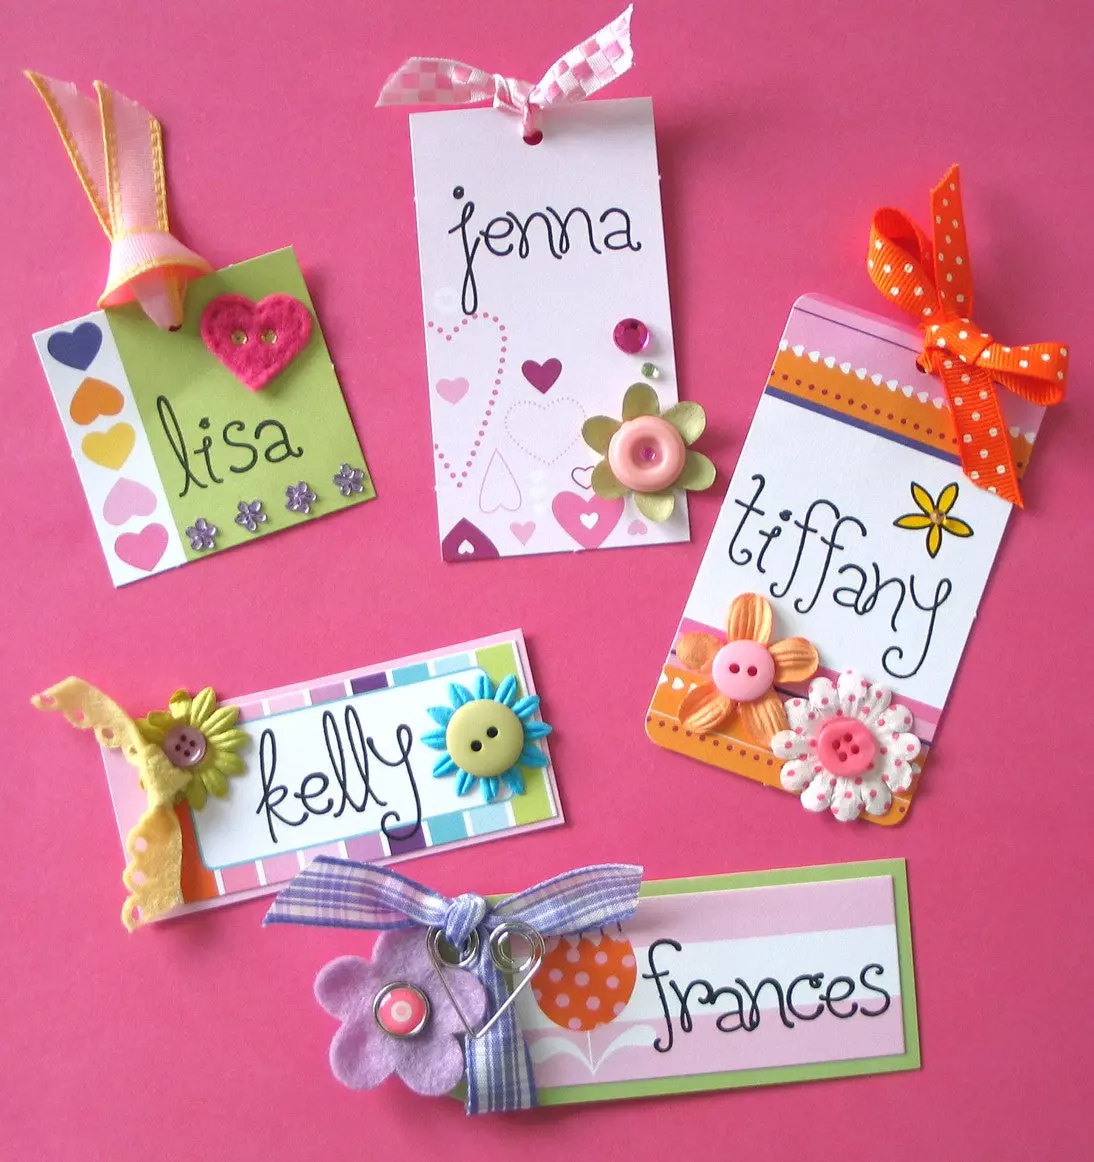 7-diy-cute-and-easy-party-name-tags